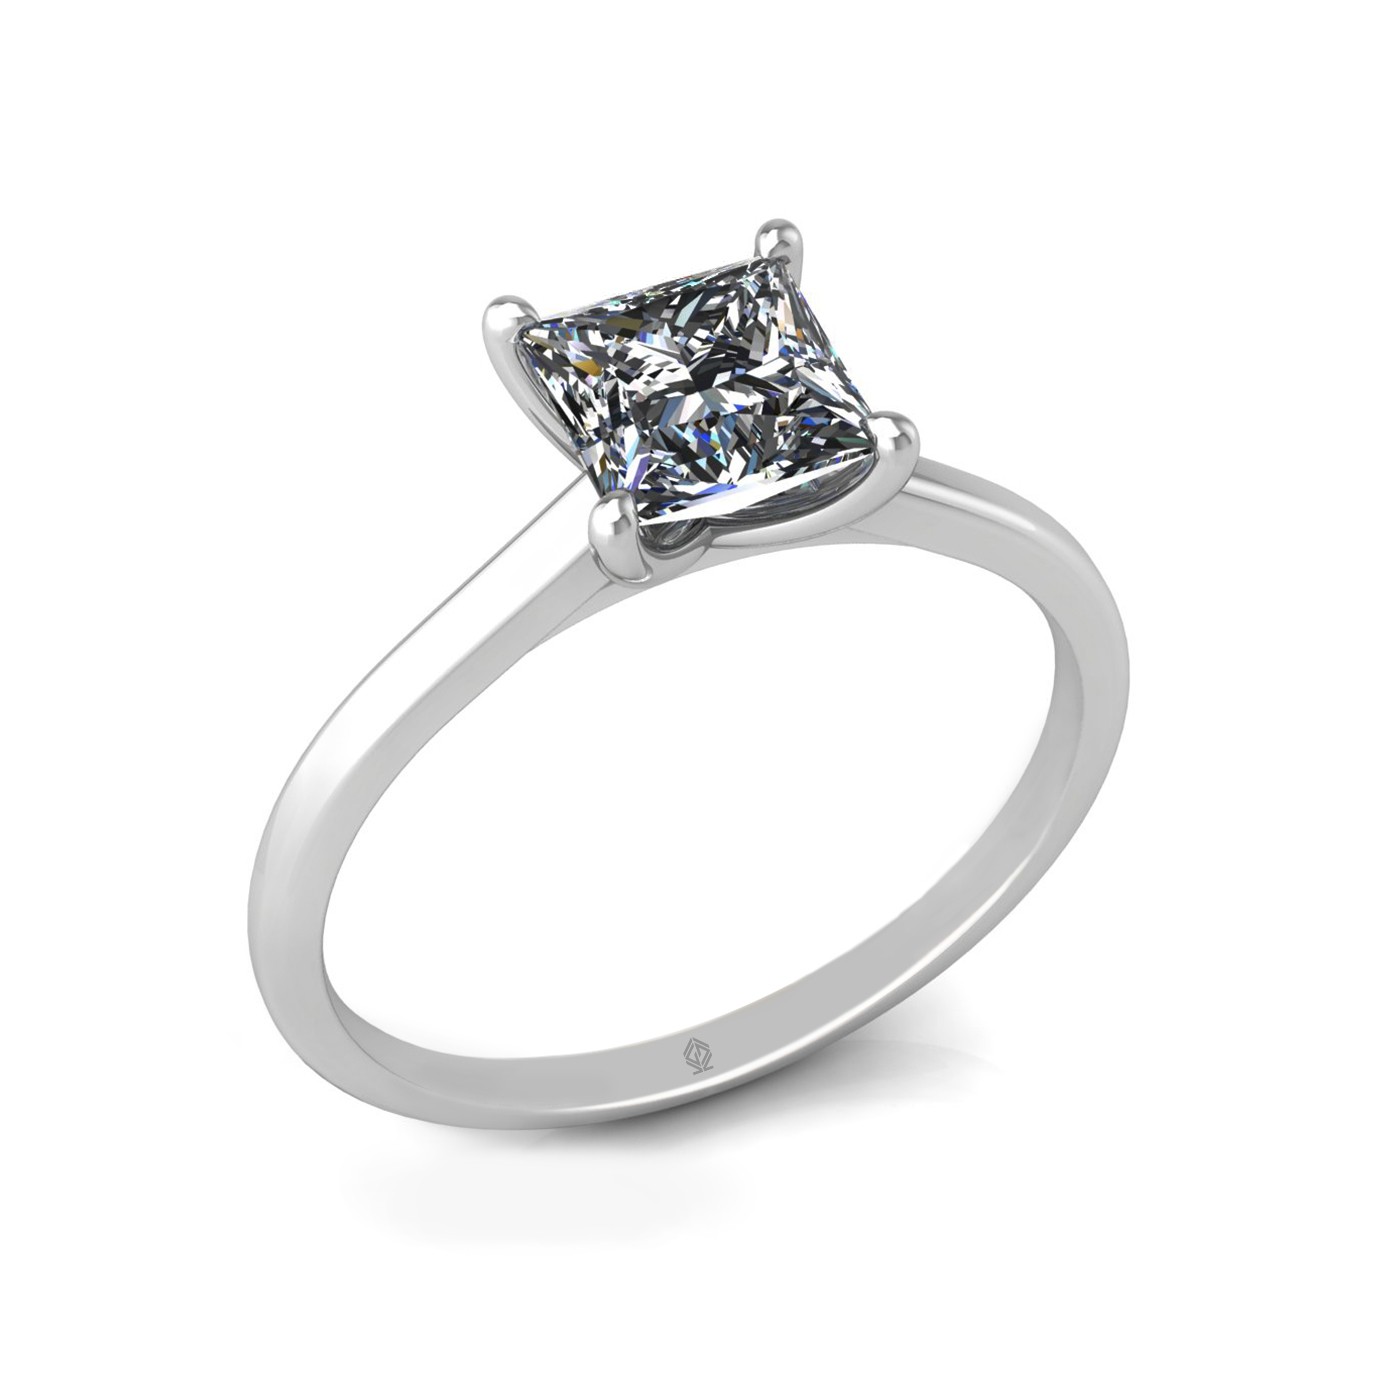 18k white gold  1,00 ct 4 prongs solitaire princess cut diamond engagement ring with whisper thin band